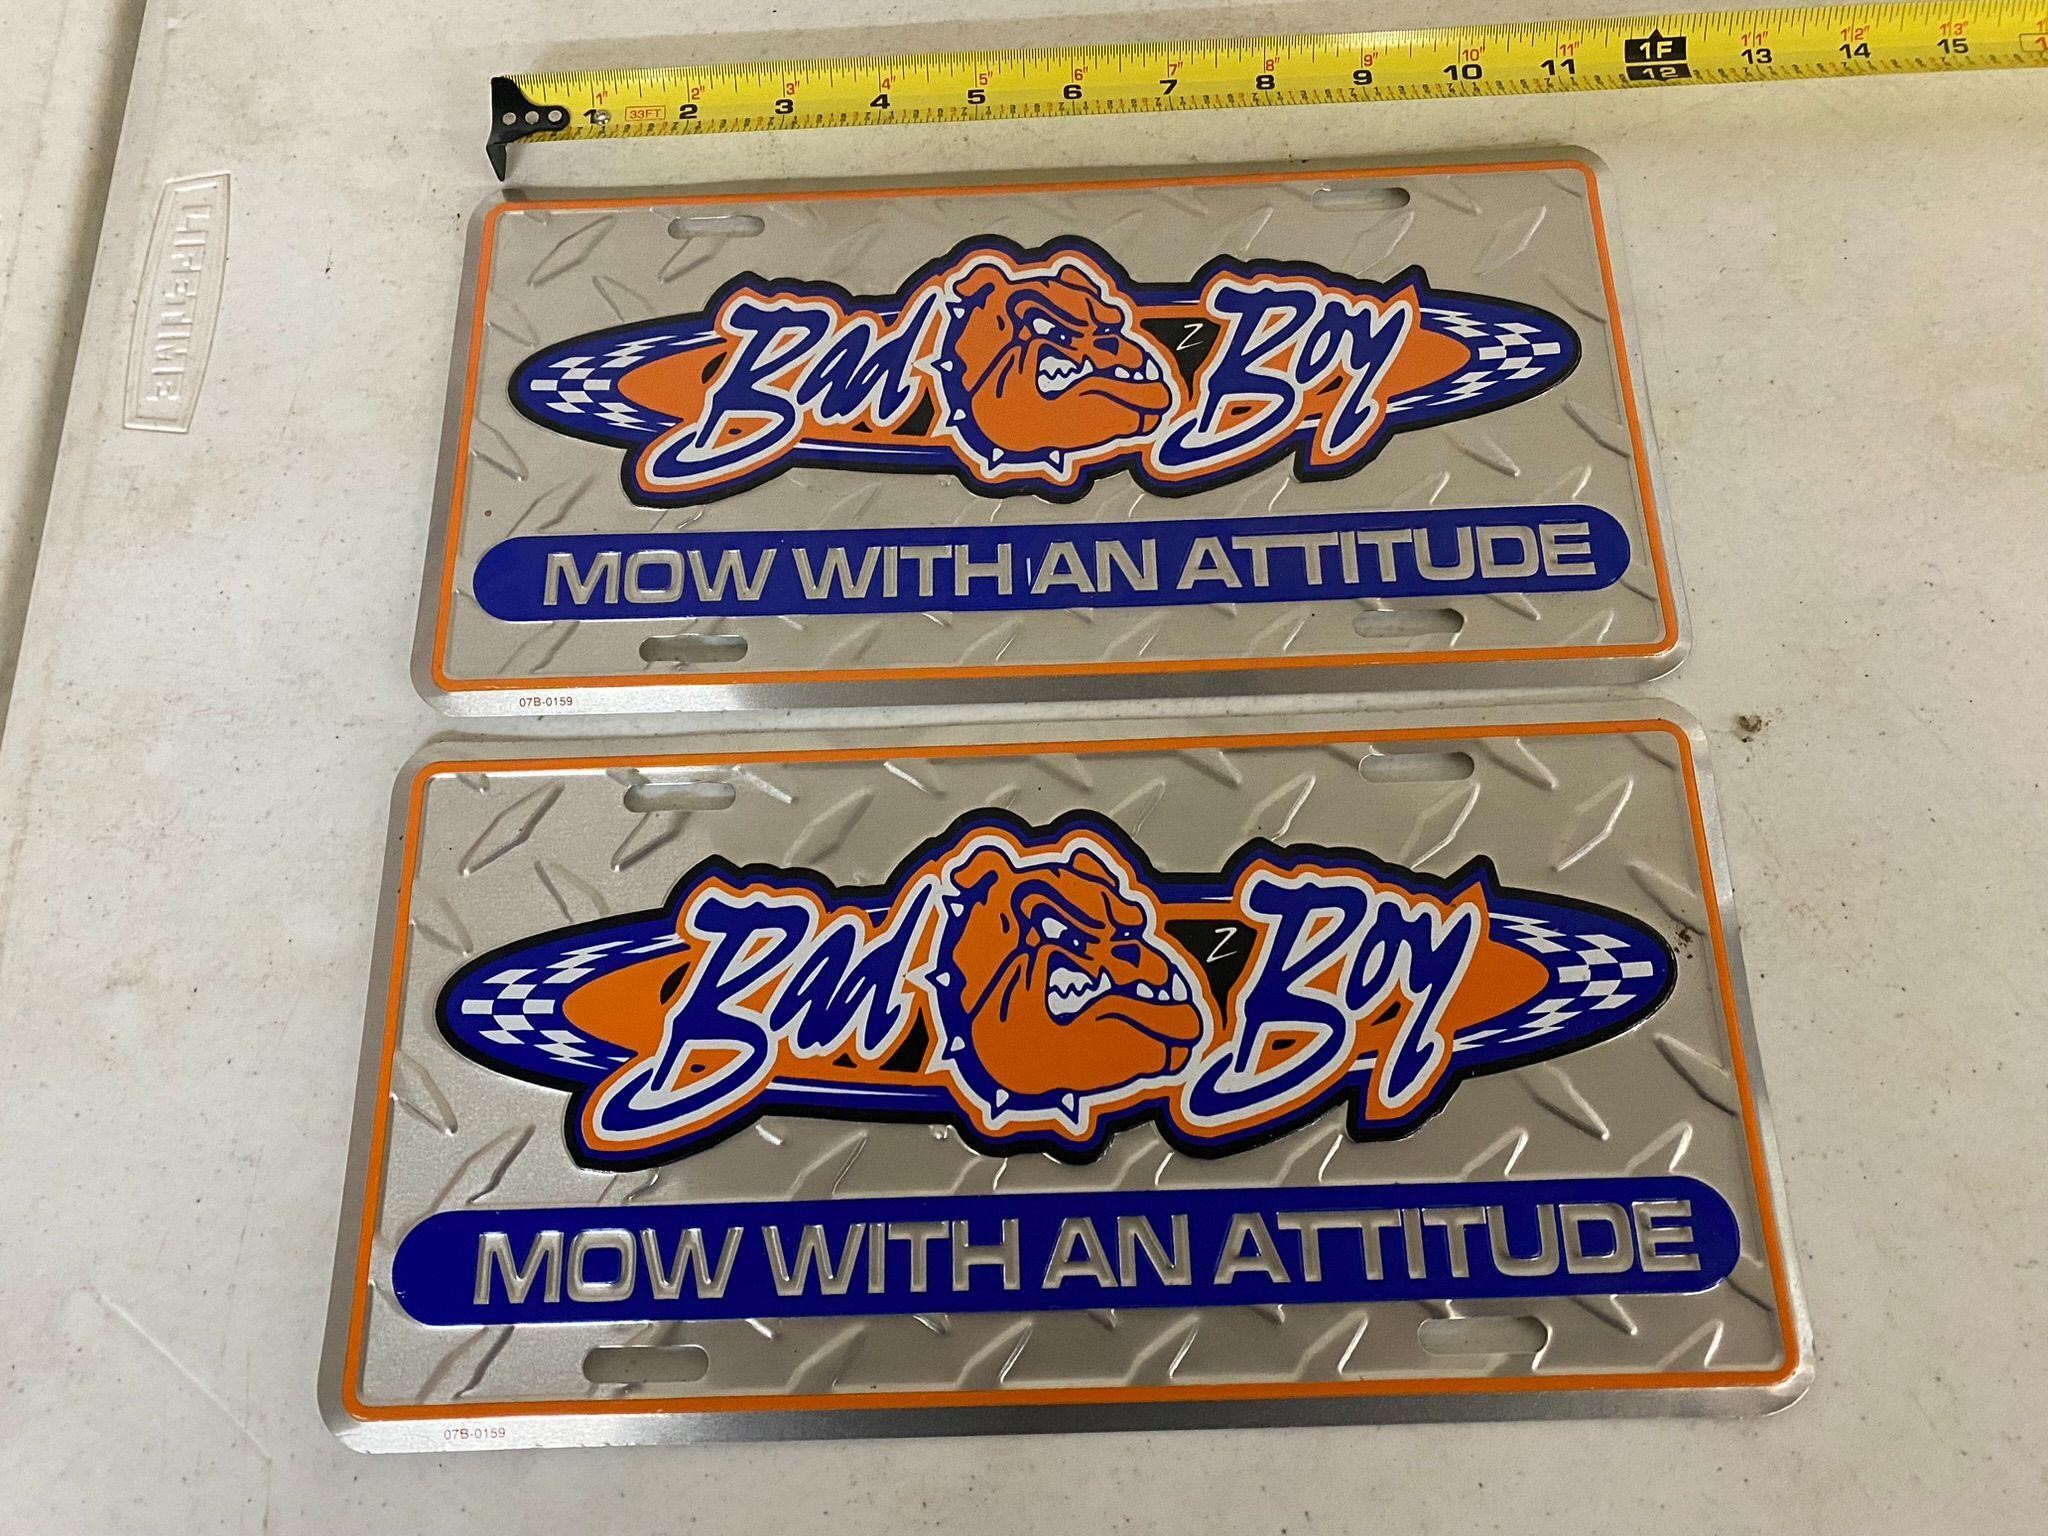 (2) Bad Boy Mow With and Attitude License Plates